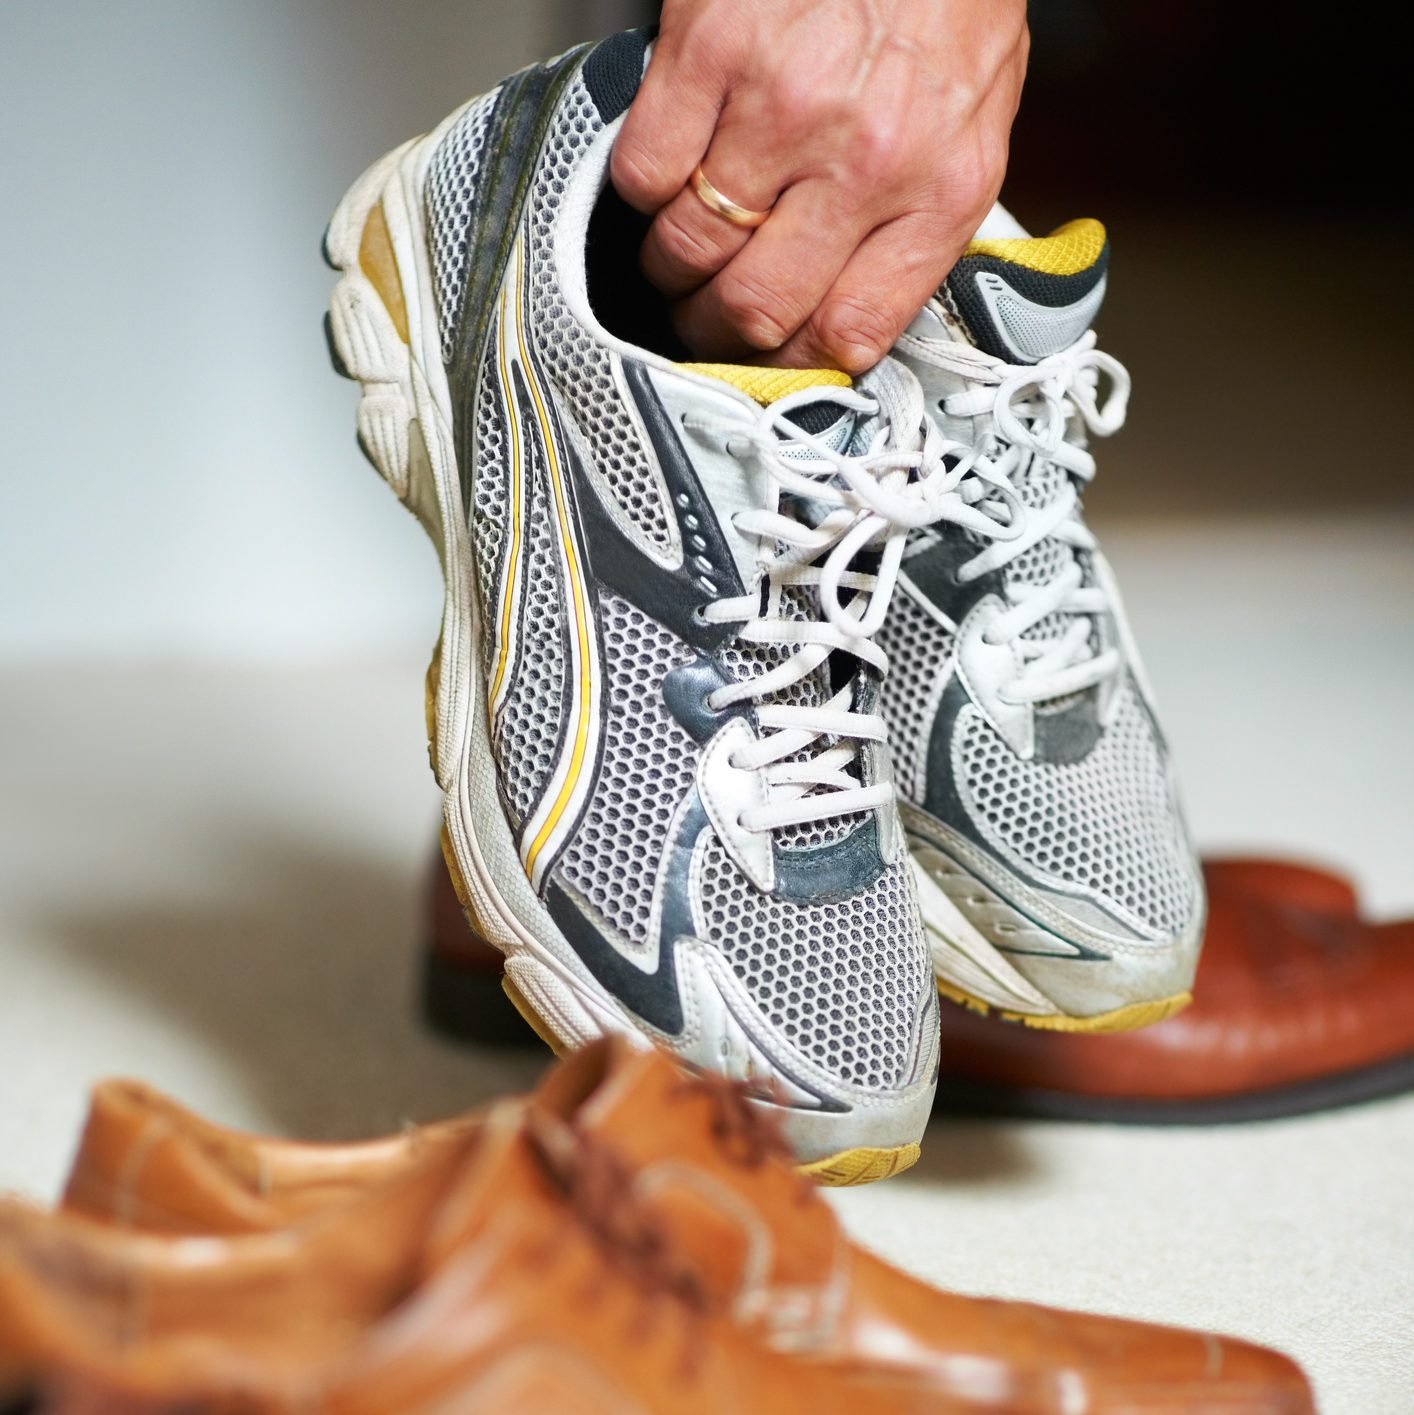 Best Diabetic Shoes for Men, According to Podiatrists | The Healthy